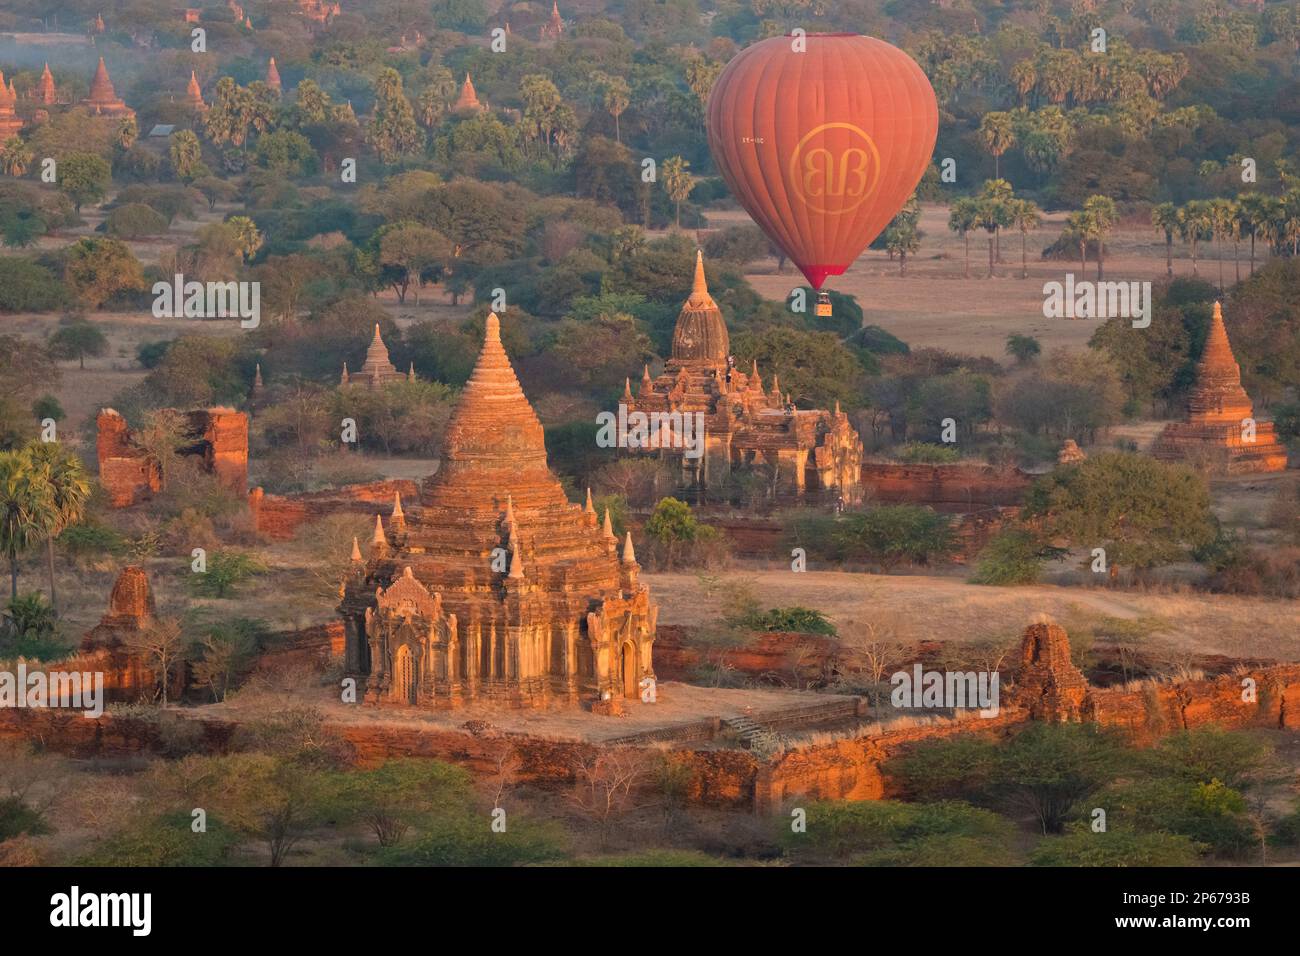 Old temple in Bagan and hot-air balloons before sunrise, Old Bagan (Pagan), UNESCO World Heritage Site, Myanmar (Burma), Asia Stock Photo